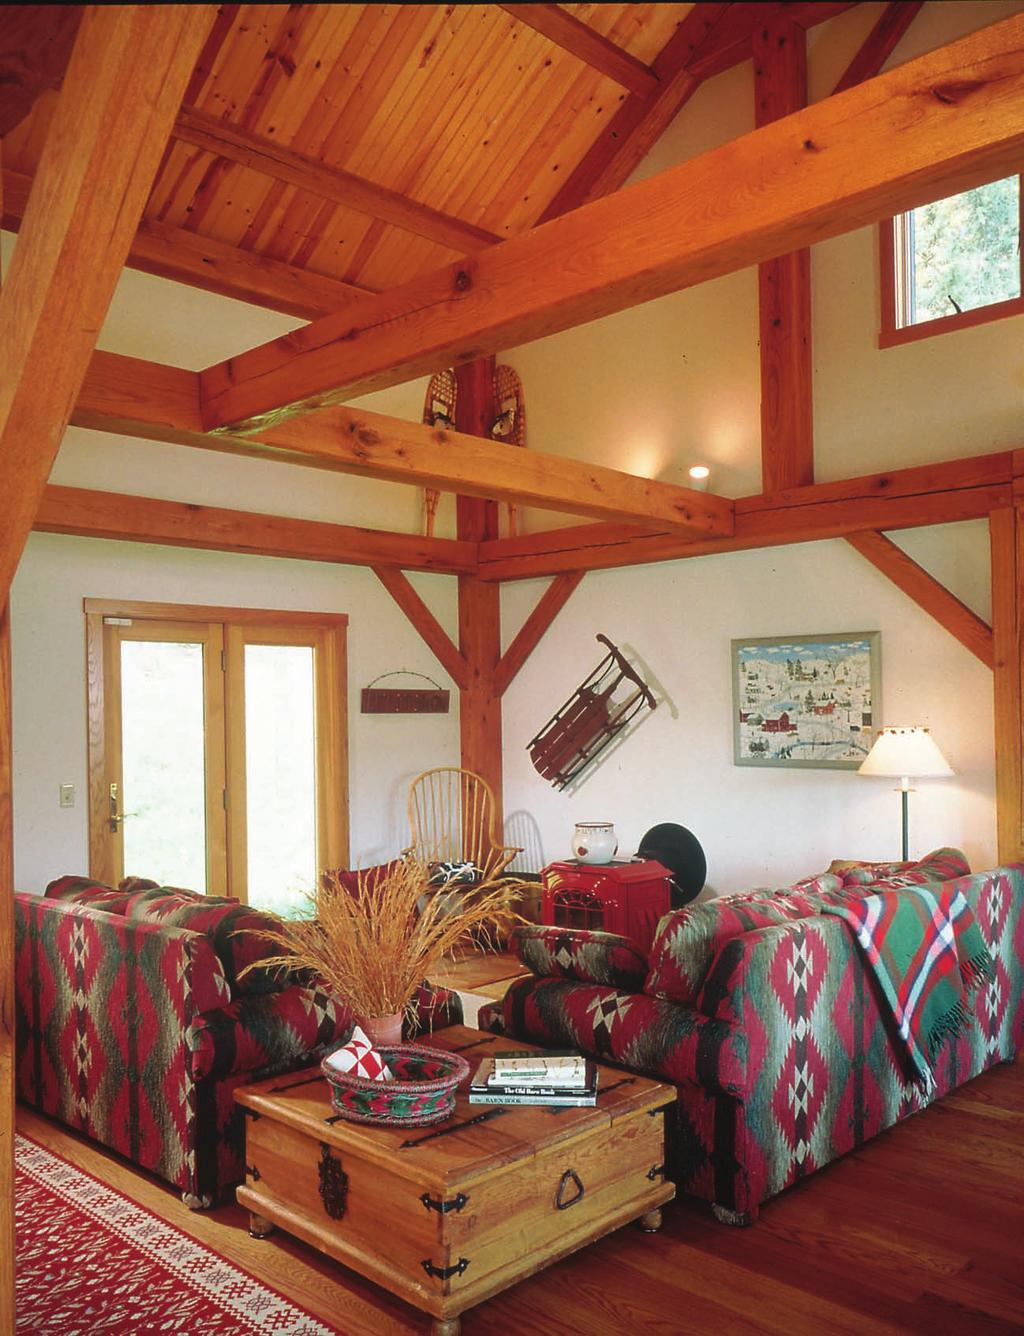 The great room showcases the beauty of the timber frame.